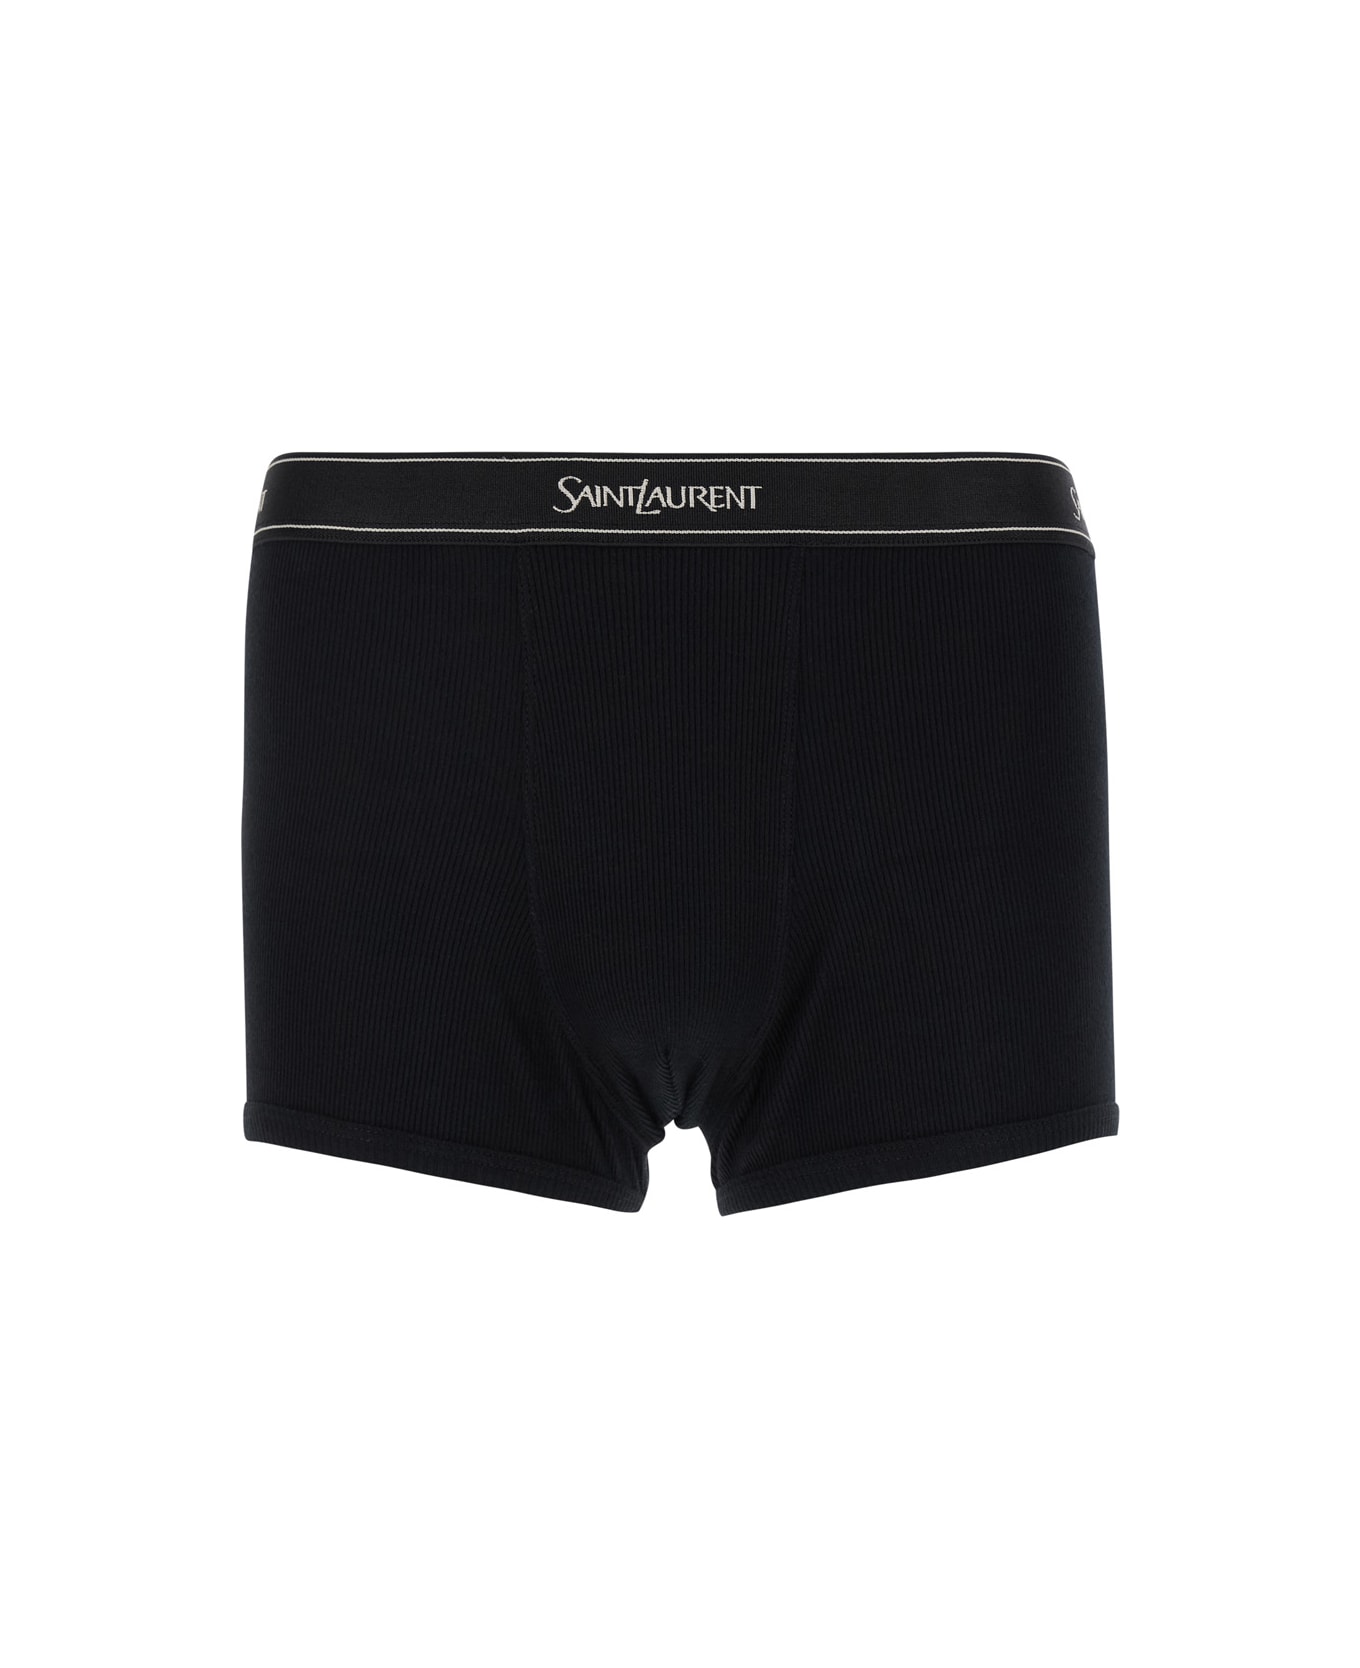 Saint Laurent Black Boxer Briefs With Logo Lettering Embroidery In Ribbed Cotton Man - NOIR ショーツ